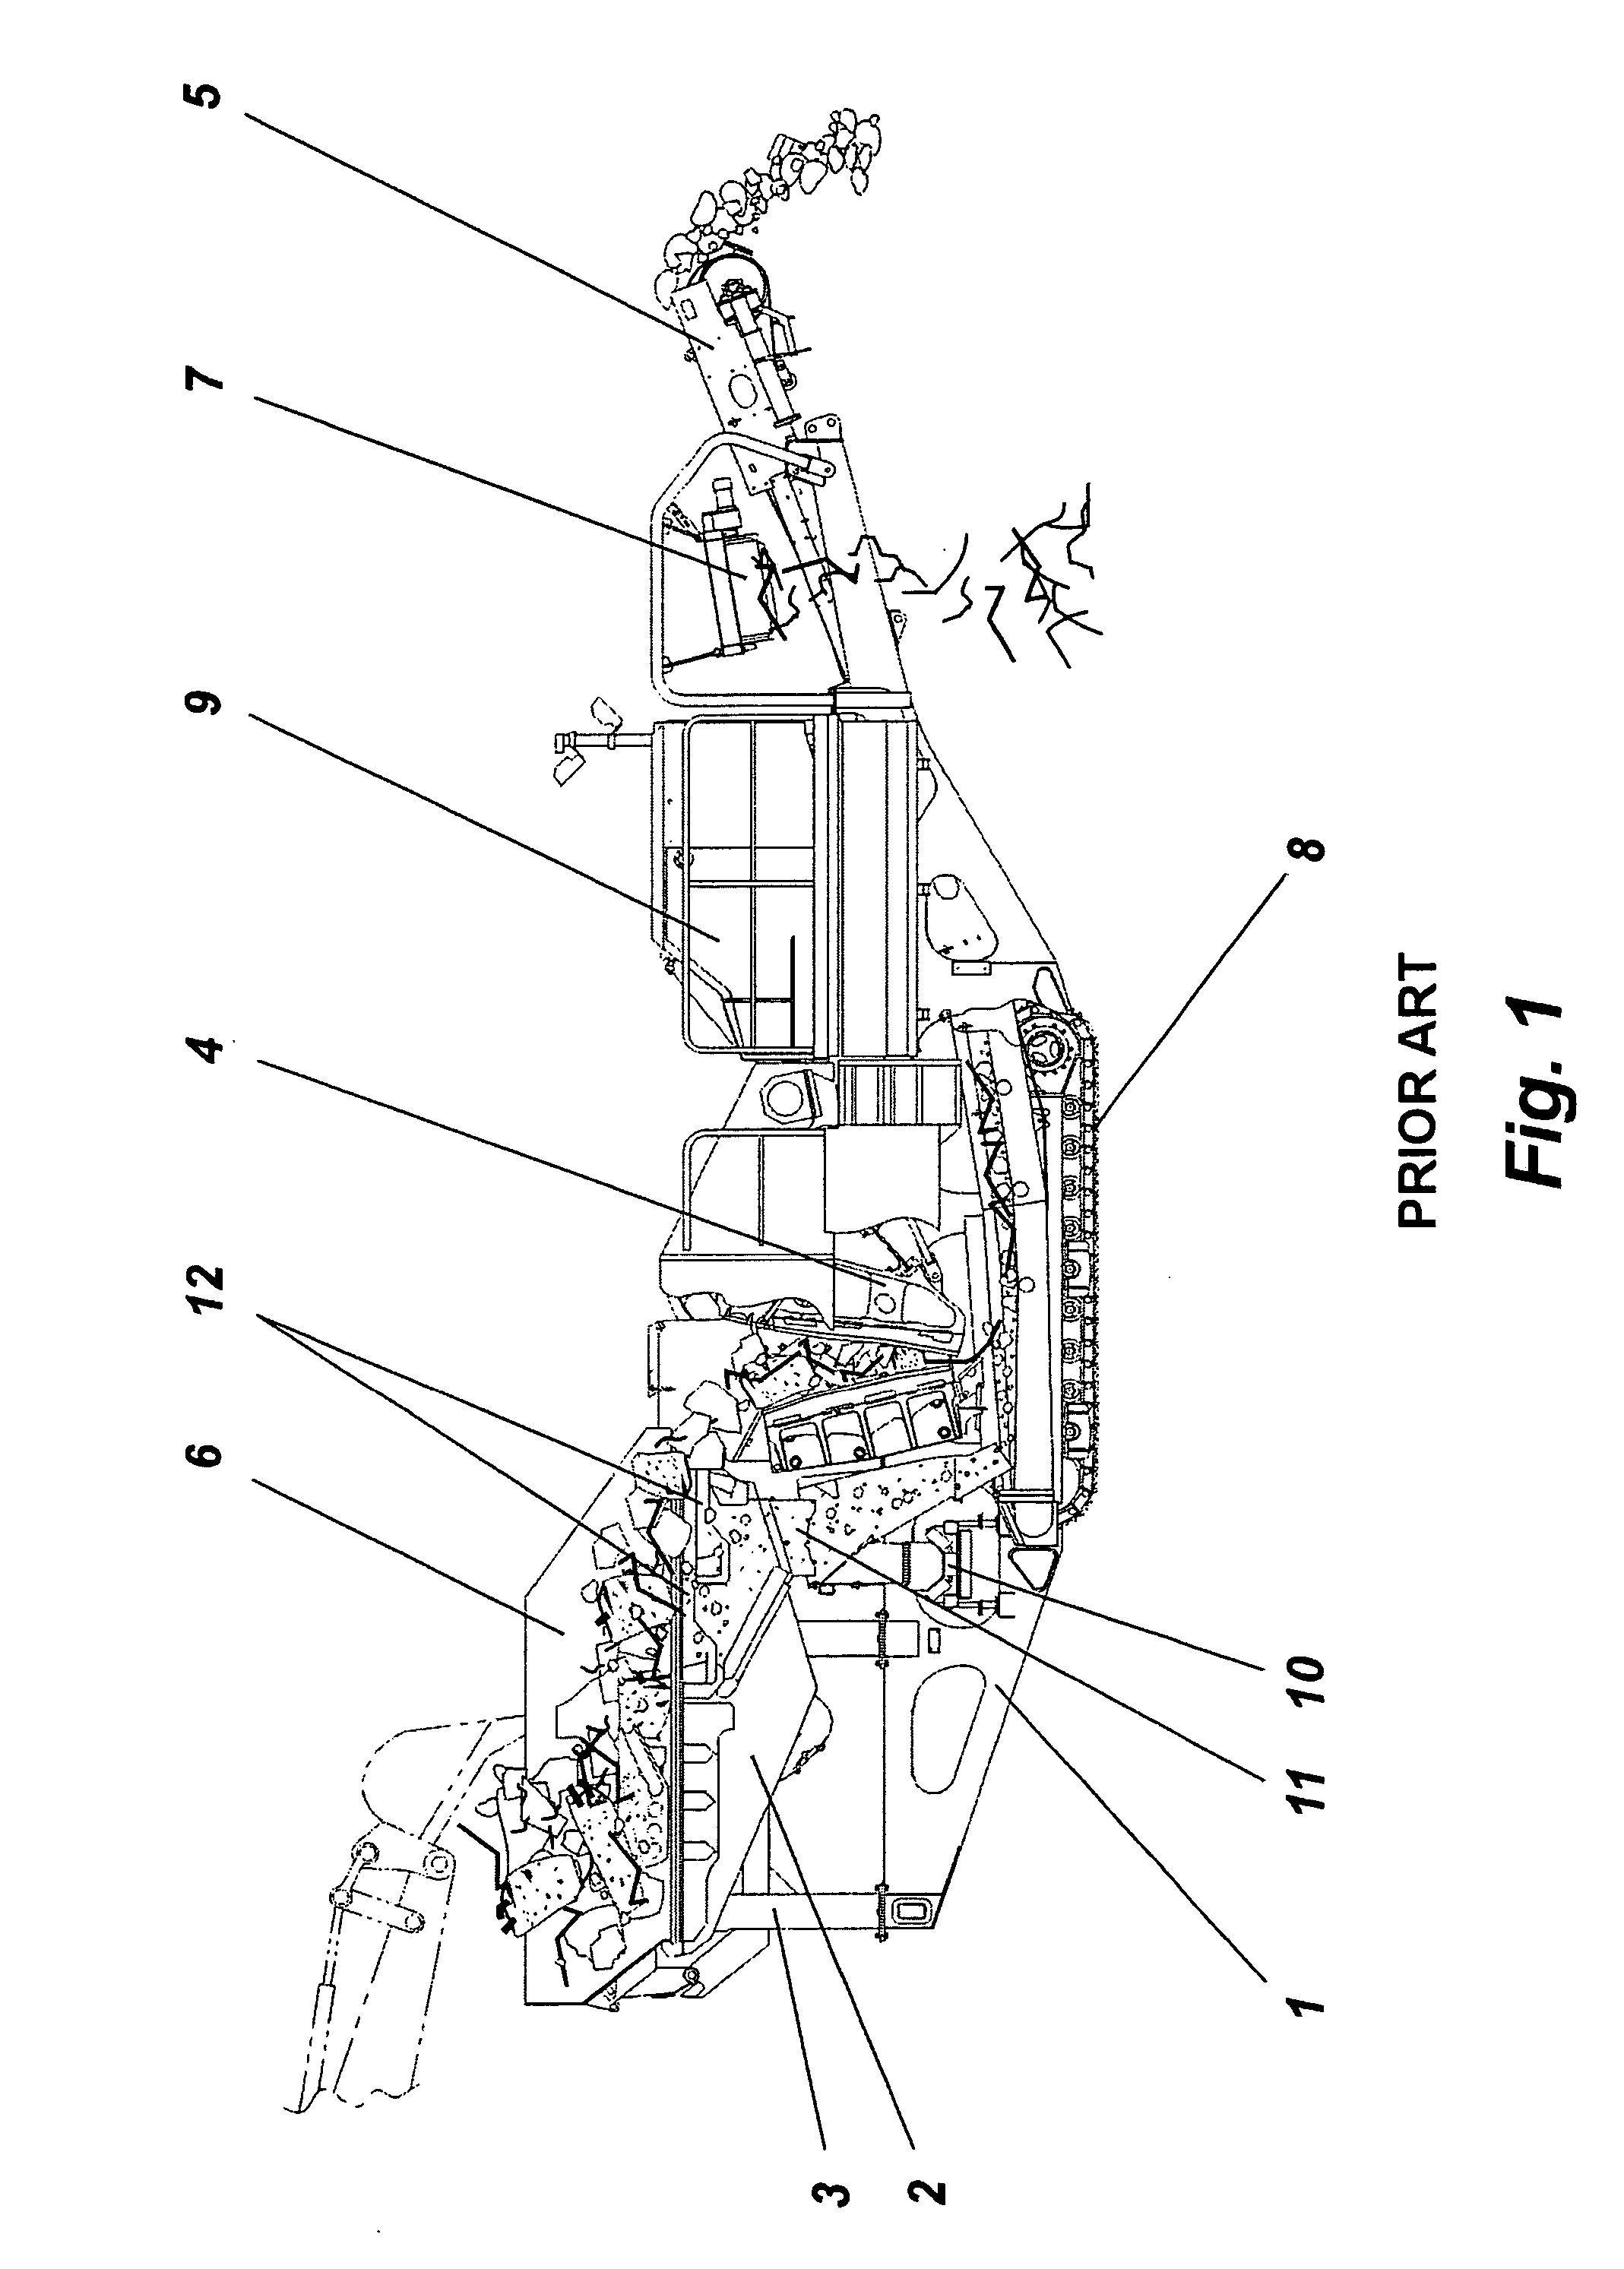 Feeder hopper, a method for locking the walls of a feeder hopper and a locking means